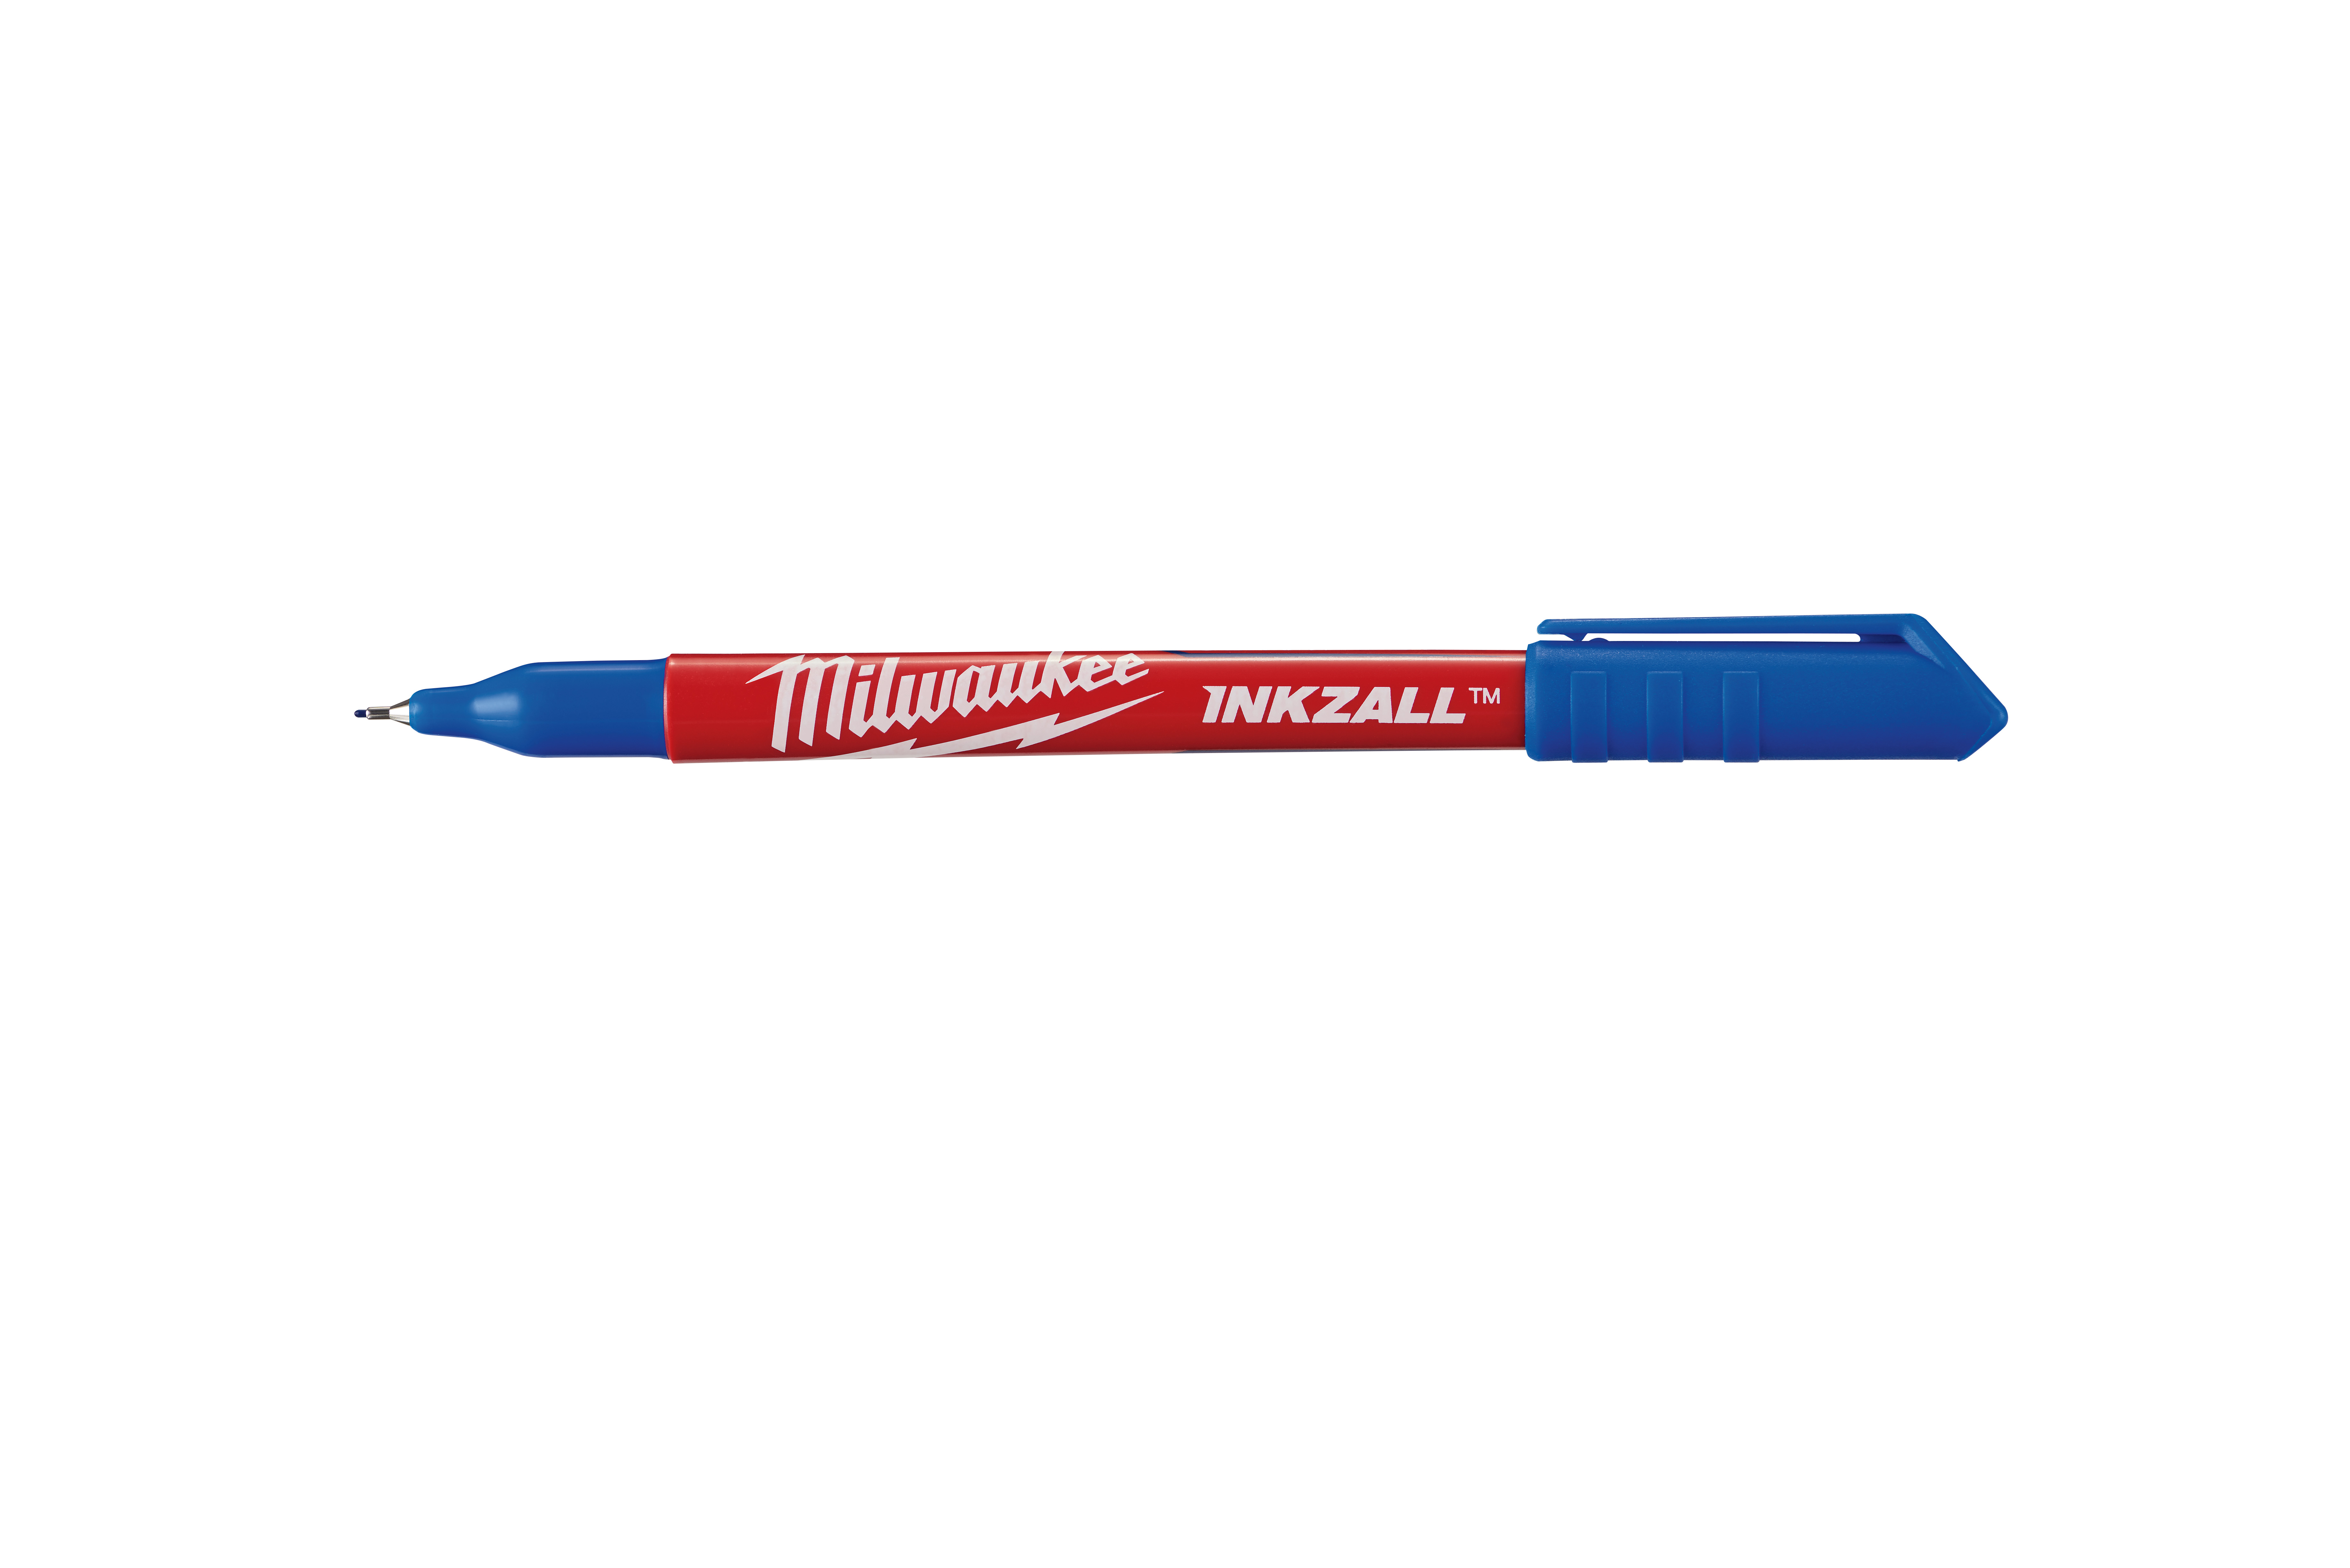 48-22-3162 045242479801 Milwaukee INKZALL™ ultra fine point pens are optimized for jobsite conditions and deliver sharp, precise lines. The durable ultra fine point tip delivers a 0.5 mm line for precise writing and labeling. Bleed resistant ink drys quickly and resists smears. 72 hour cap-off life delivers extended performance and use. An integrated pocket clip enables easy carry and storage.